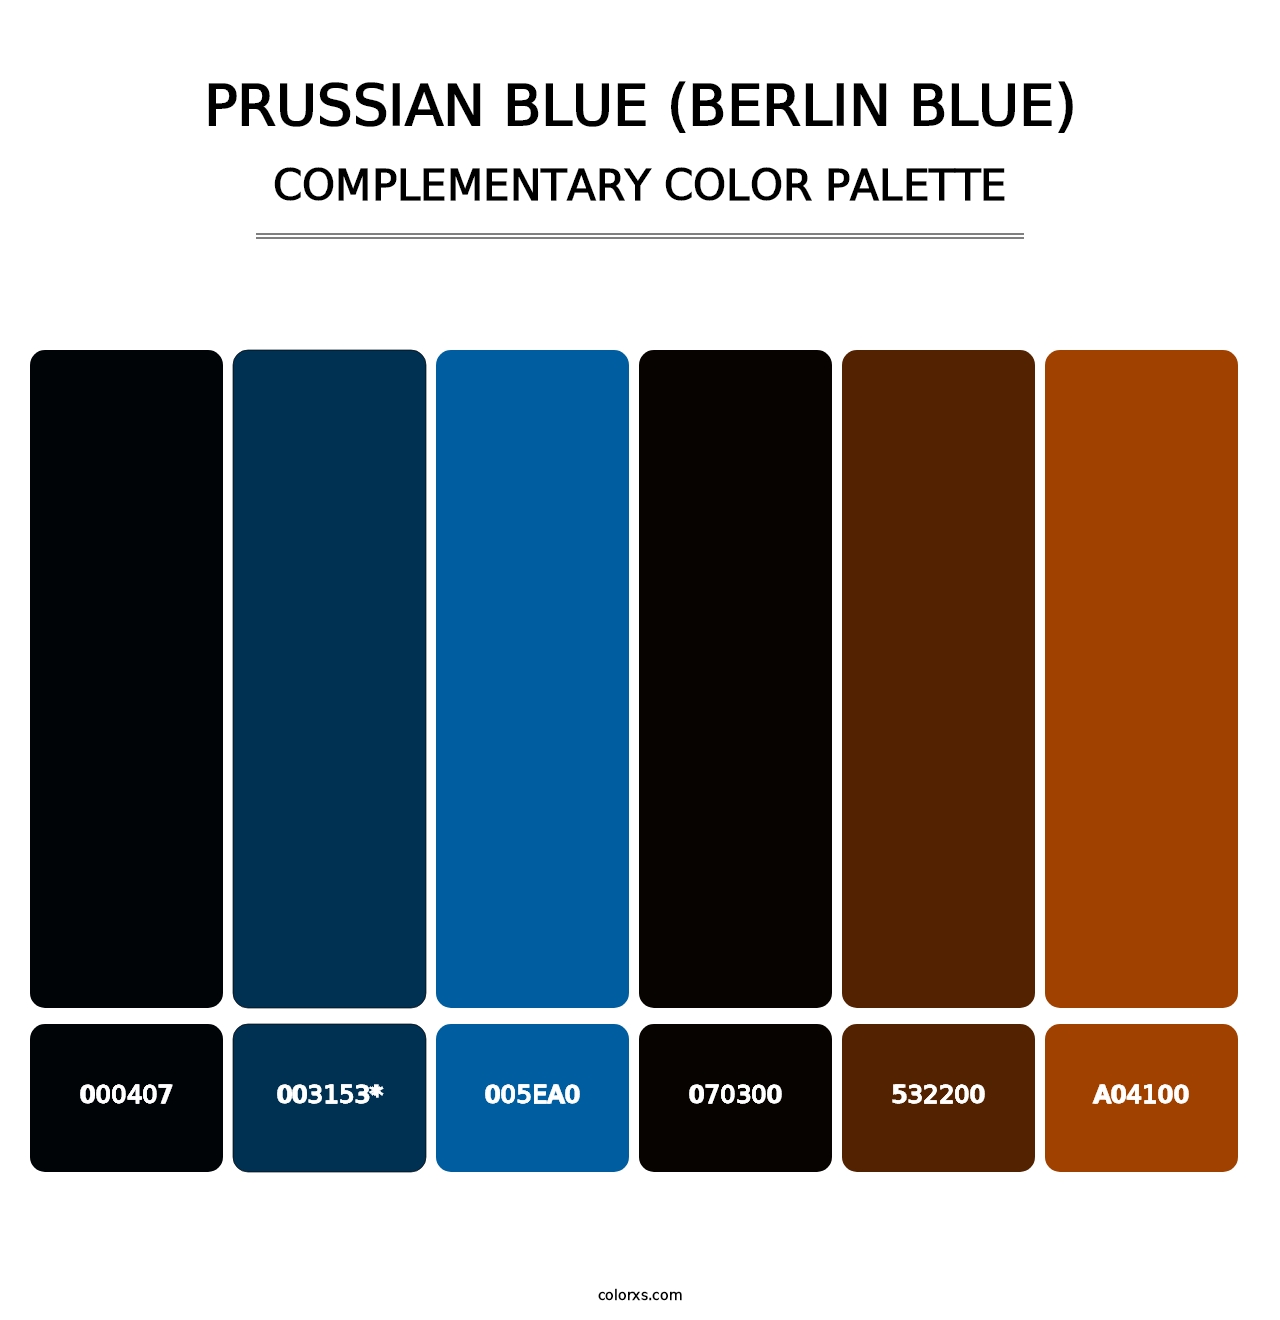 Prussian Blue (Berlin Blue) - Complementary Color Palette